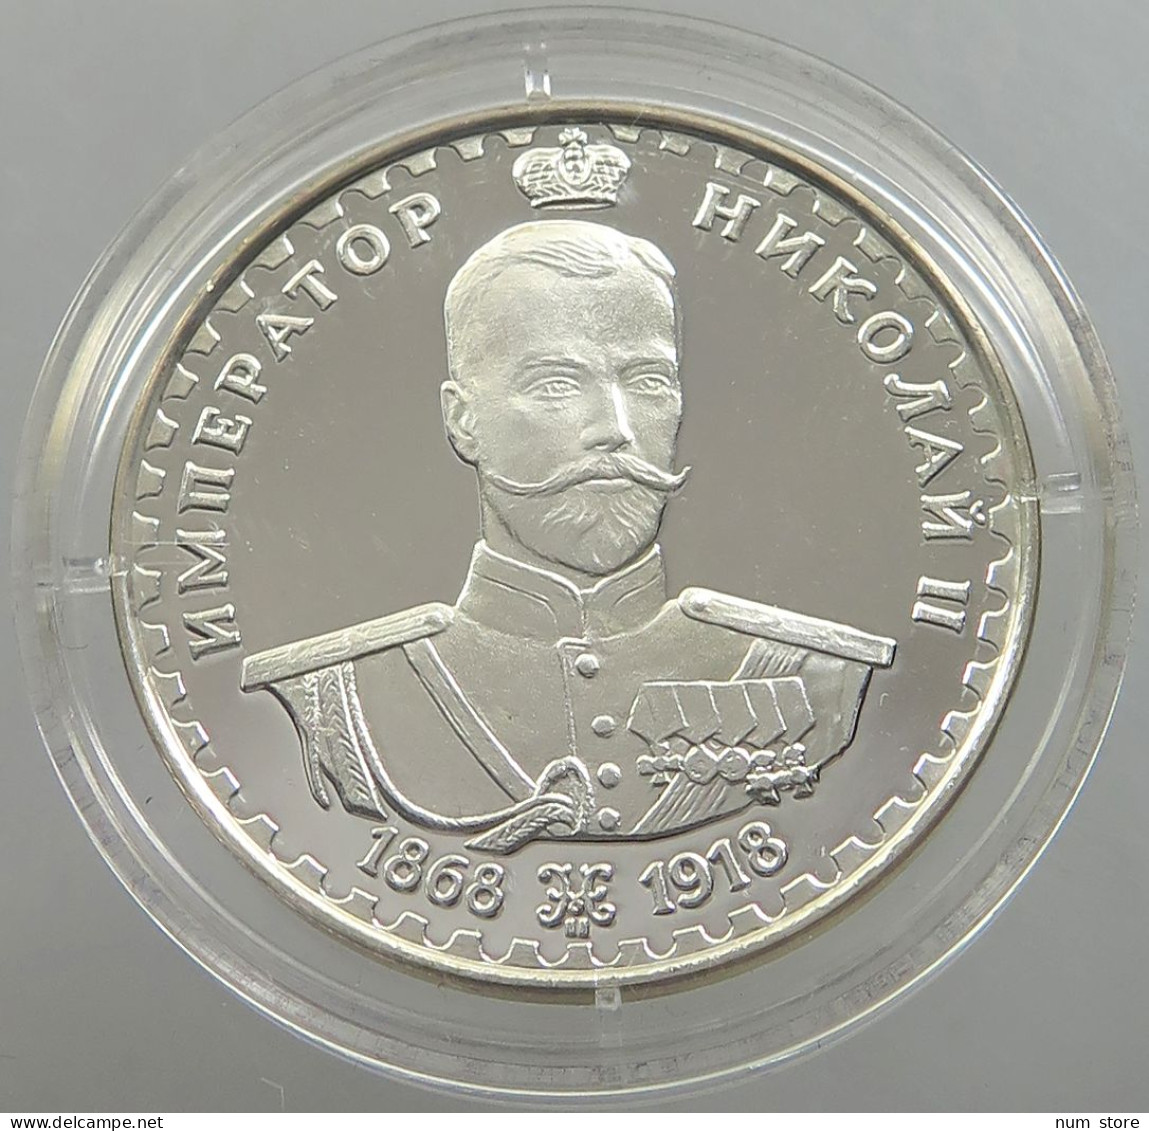 RUSSIA SILVER MEDAL NIKOLAUS 1868-1918 PROOF 10G #sm14 0189 - Russia